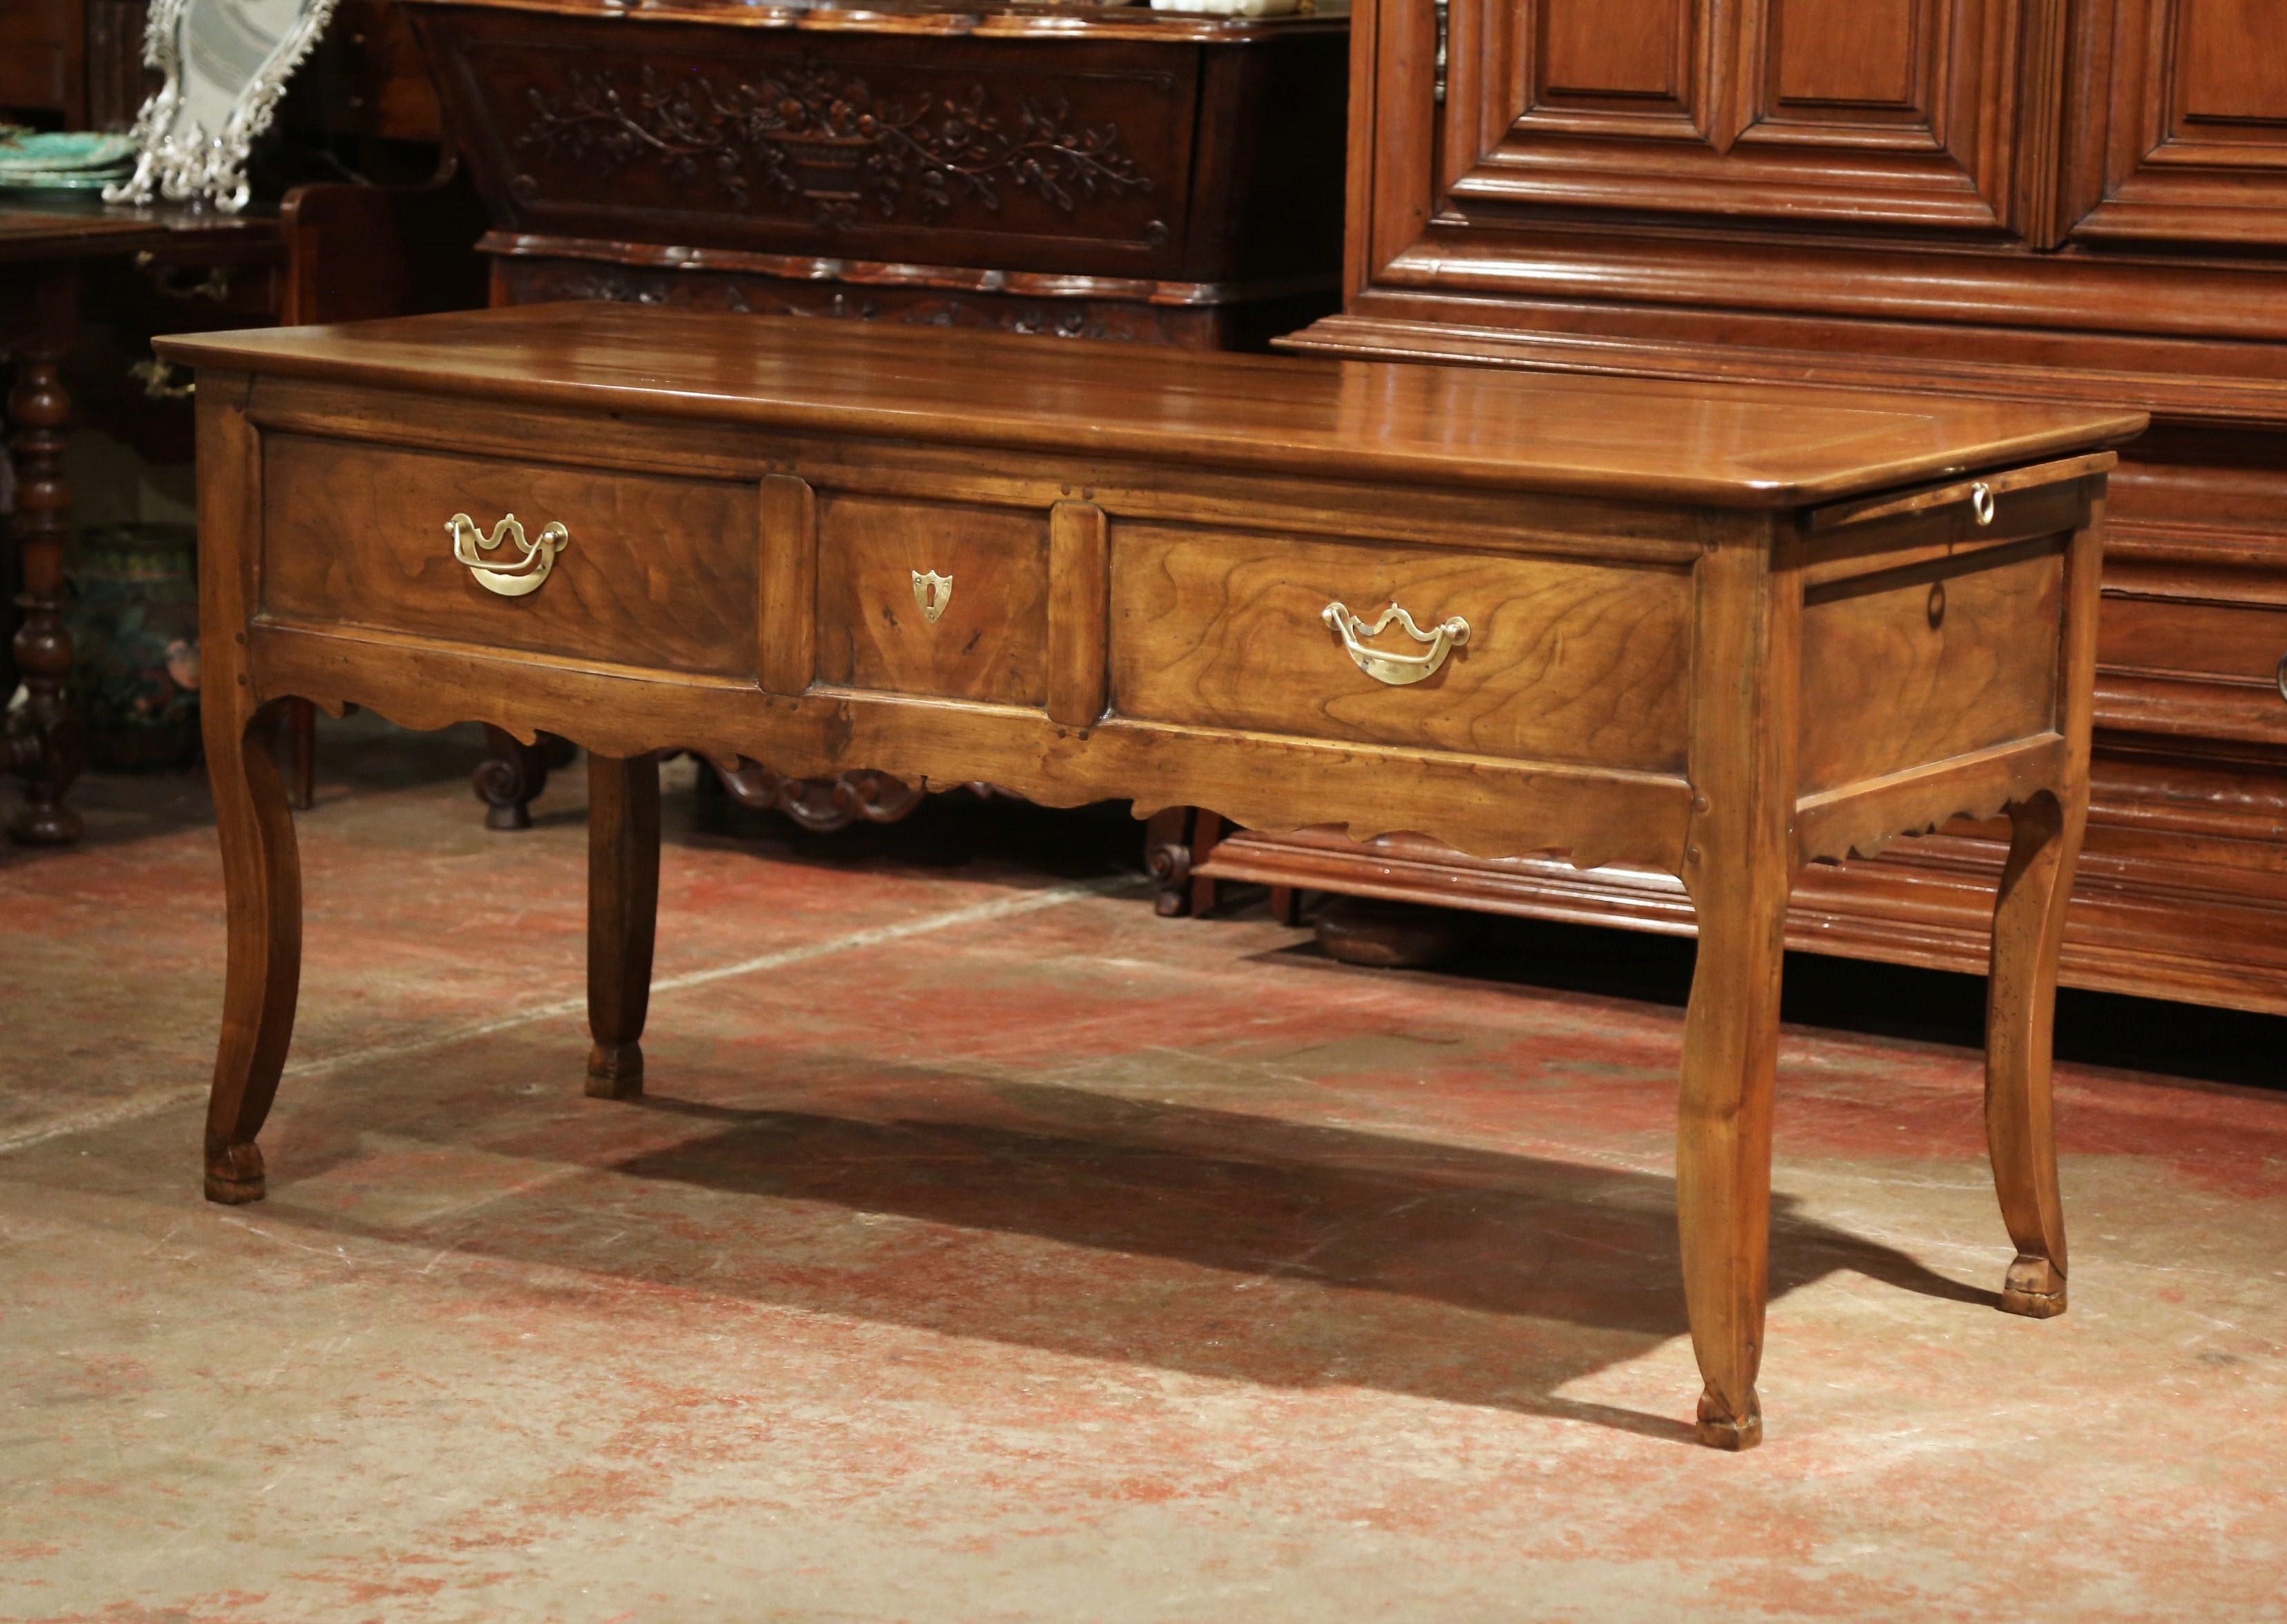 19th Century French Louis XV Carved Cherry Desk with Drawers and Pull Out Trays (Handgeschnitzt)